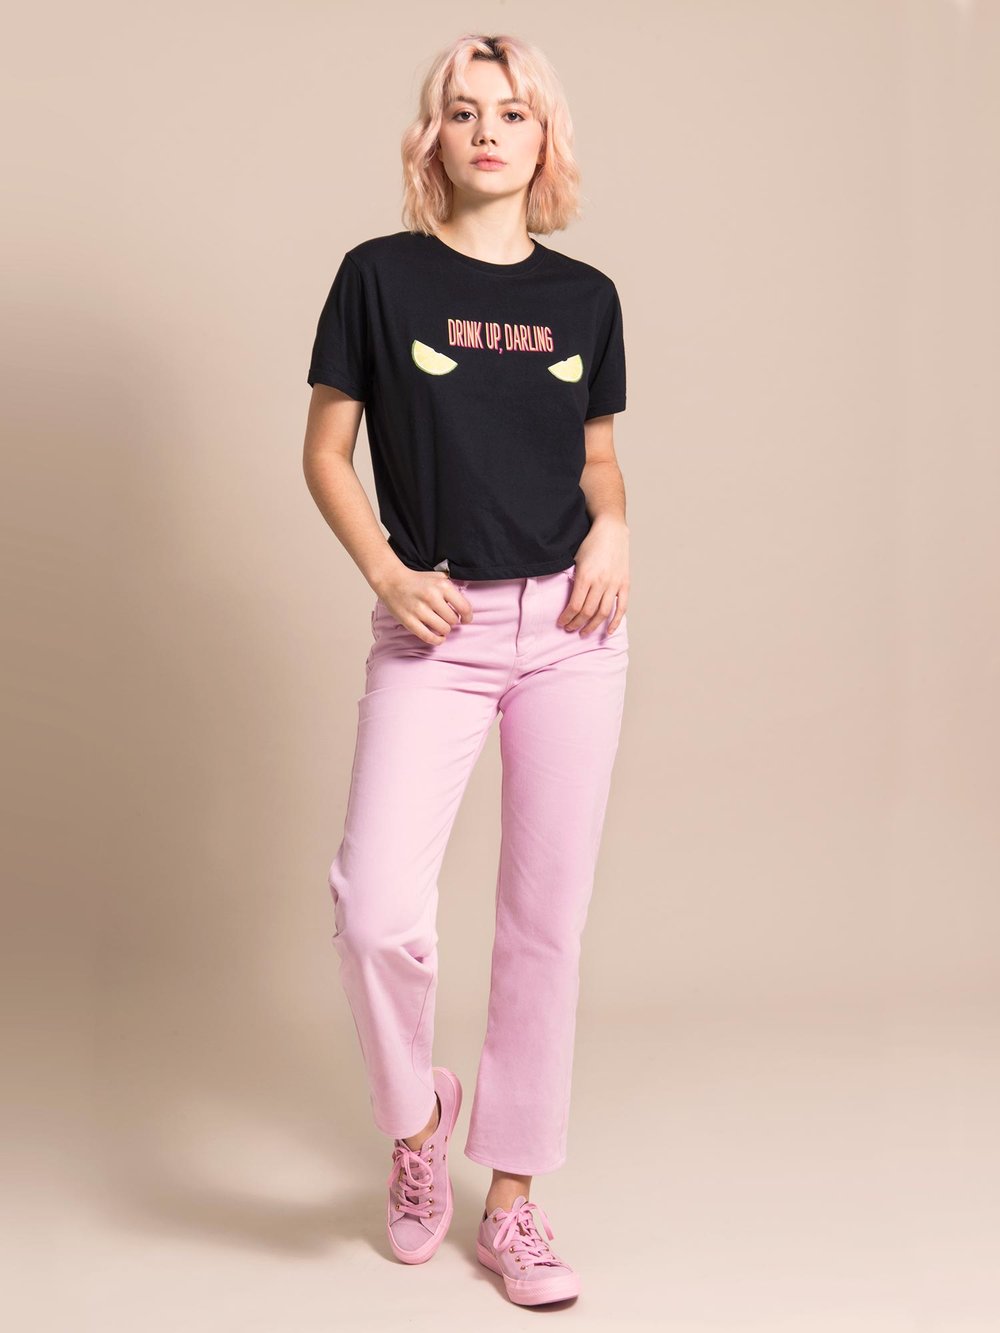 Woman wearing a black tee with print and light pink sustainable jeans